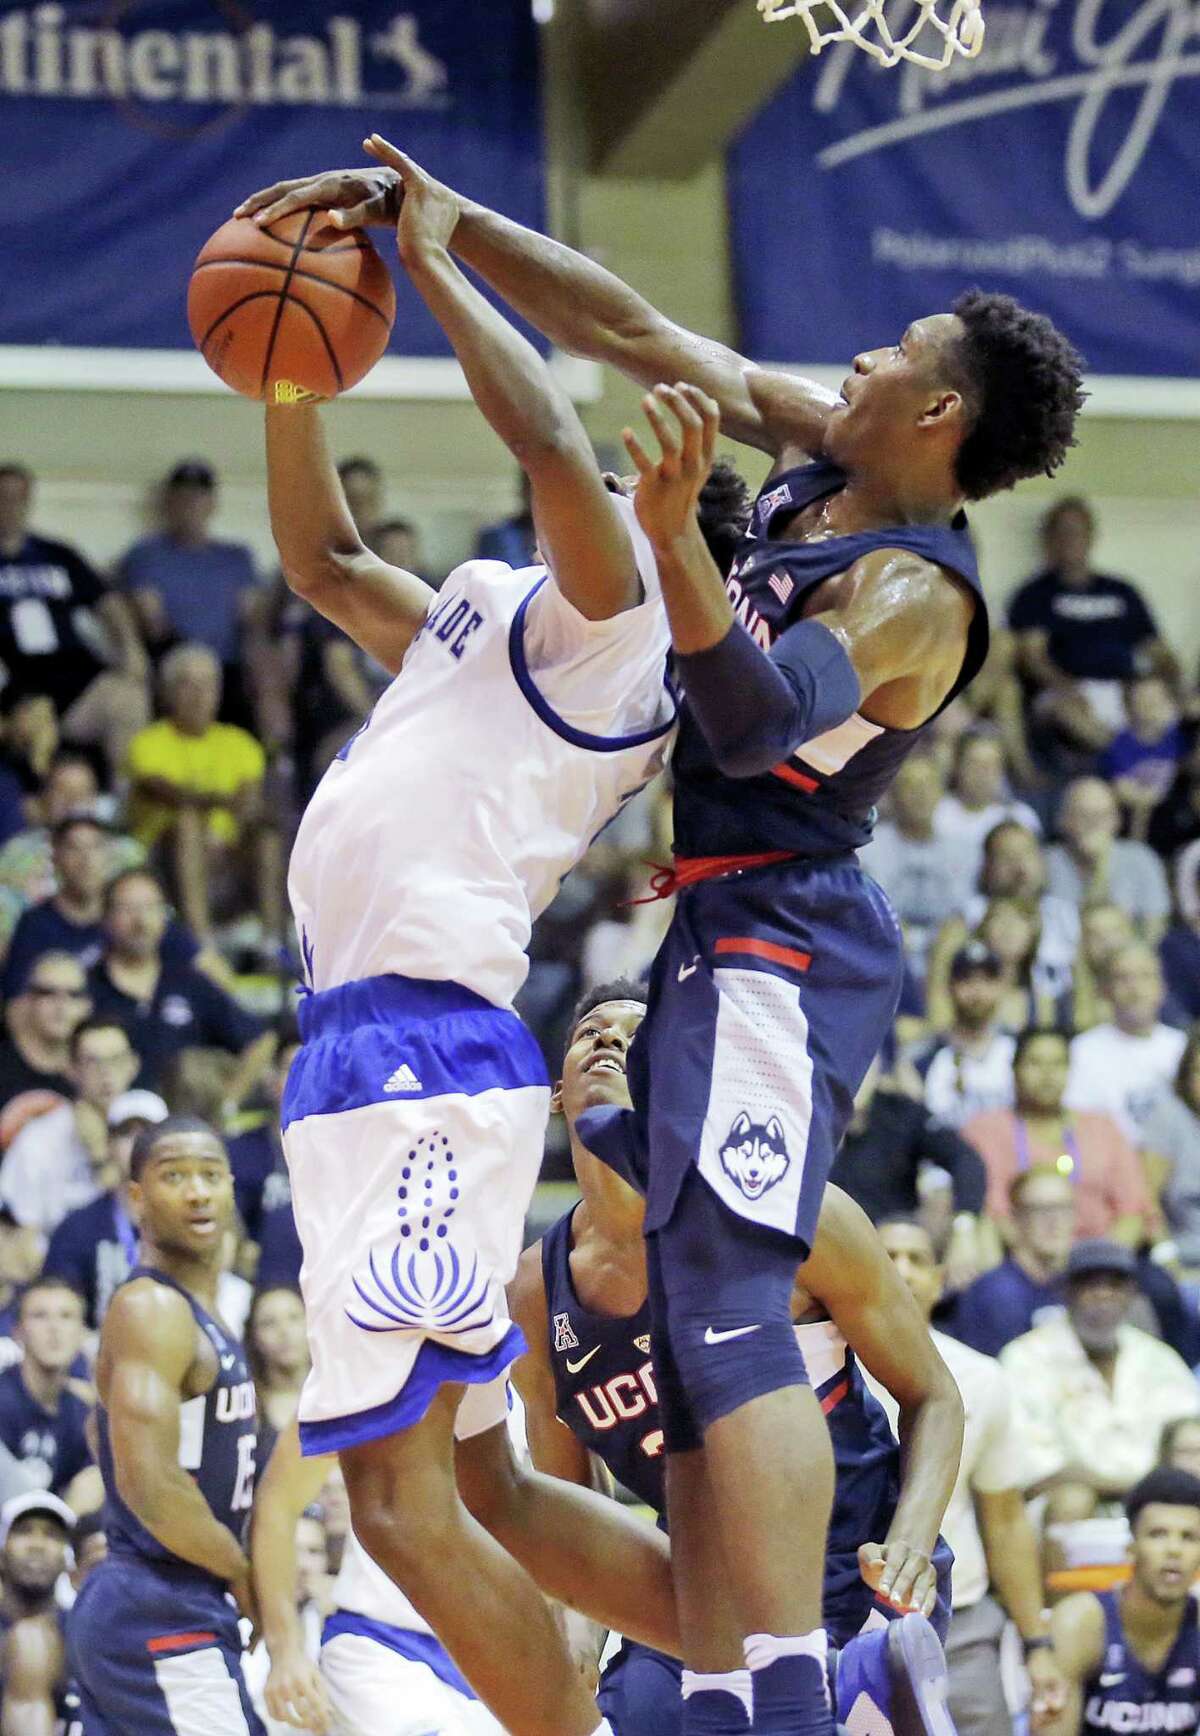 UConn guard Christian Vital, right, blocks the shot of Chaminade guard Rohndell Goodwin, left, in the first half during the Maui Invitational Tuesday.